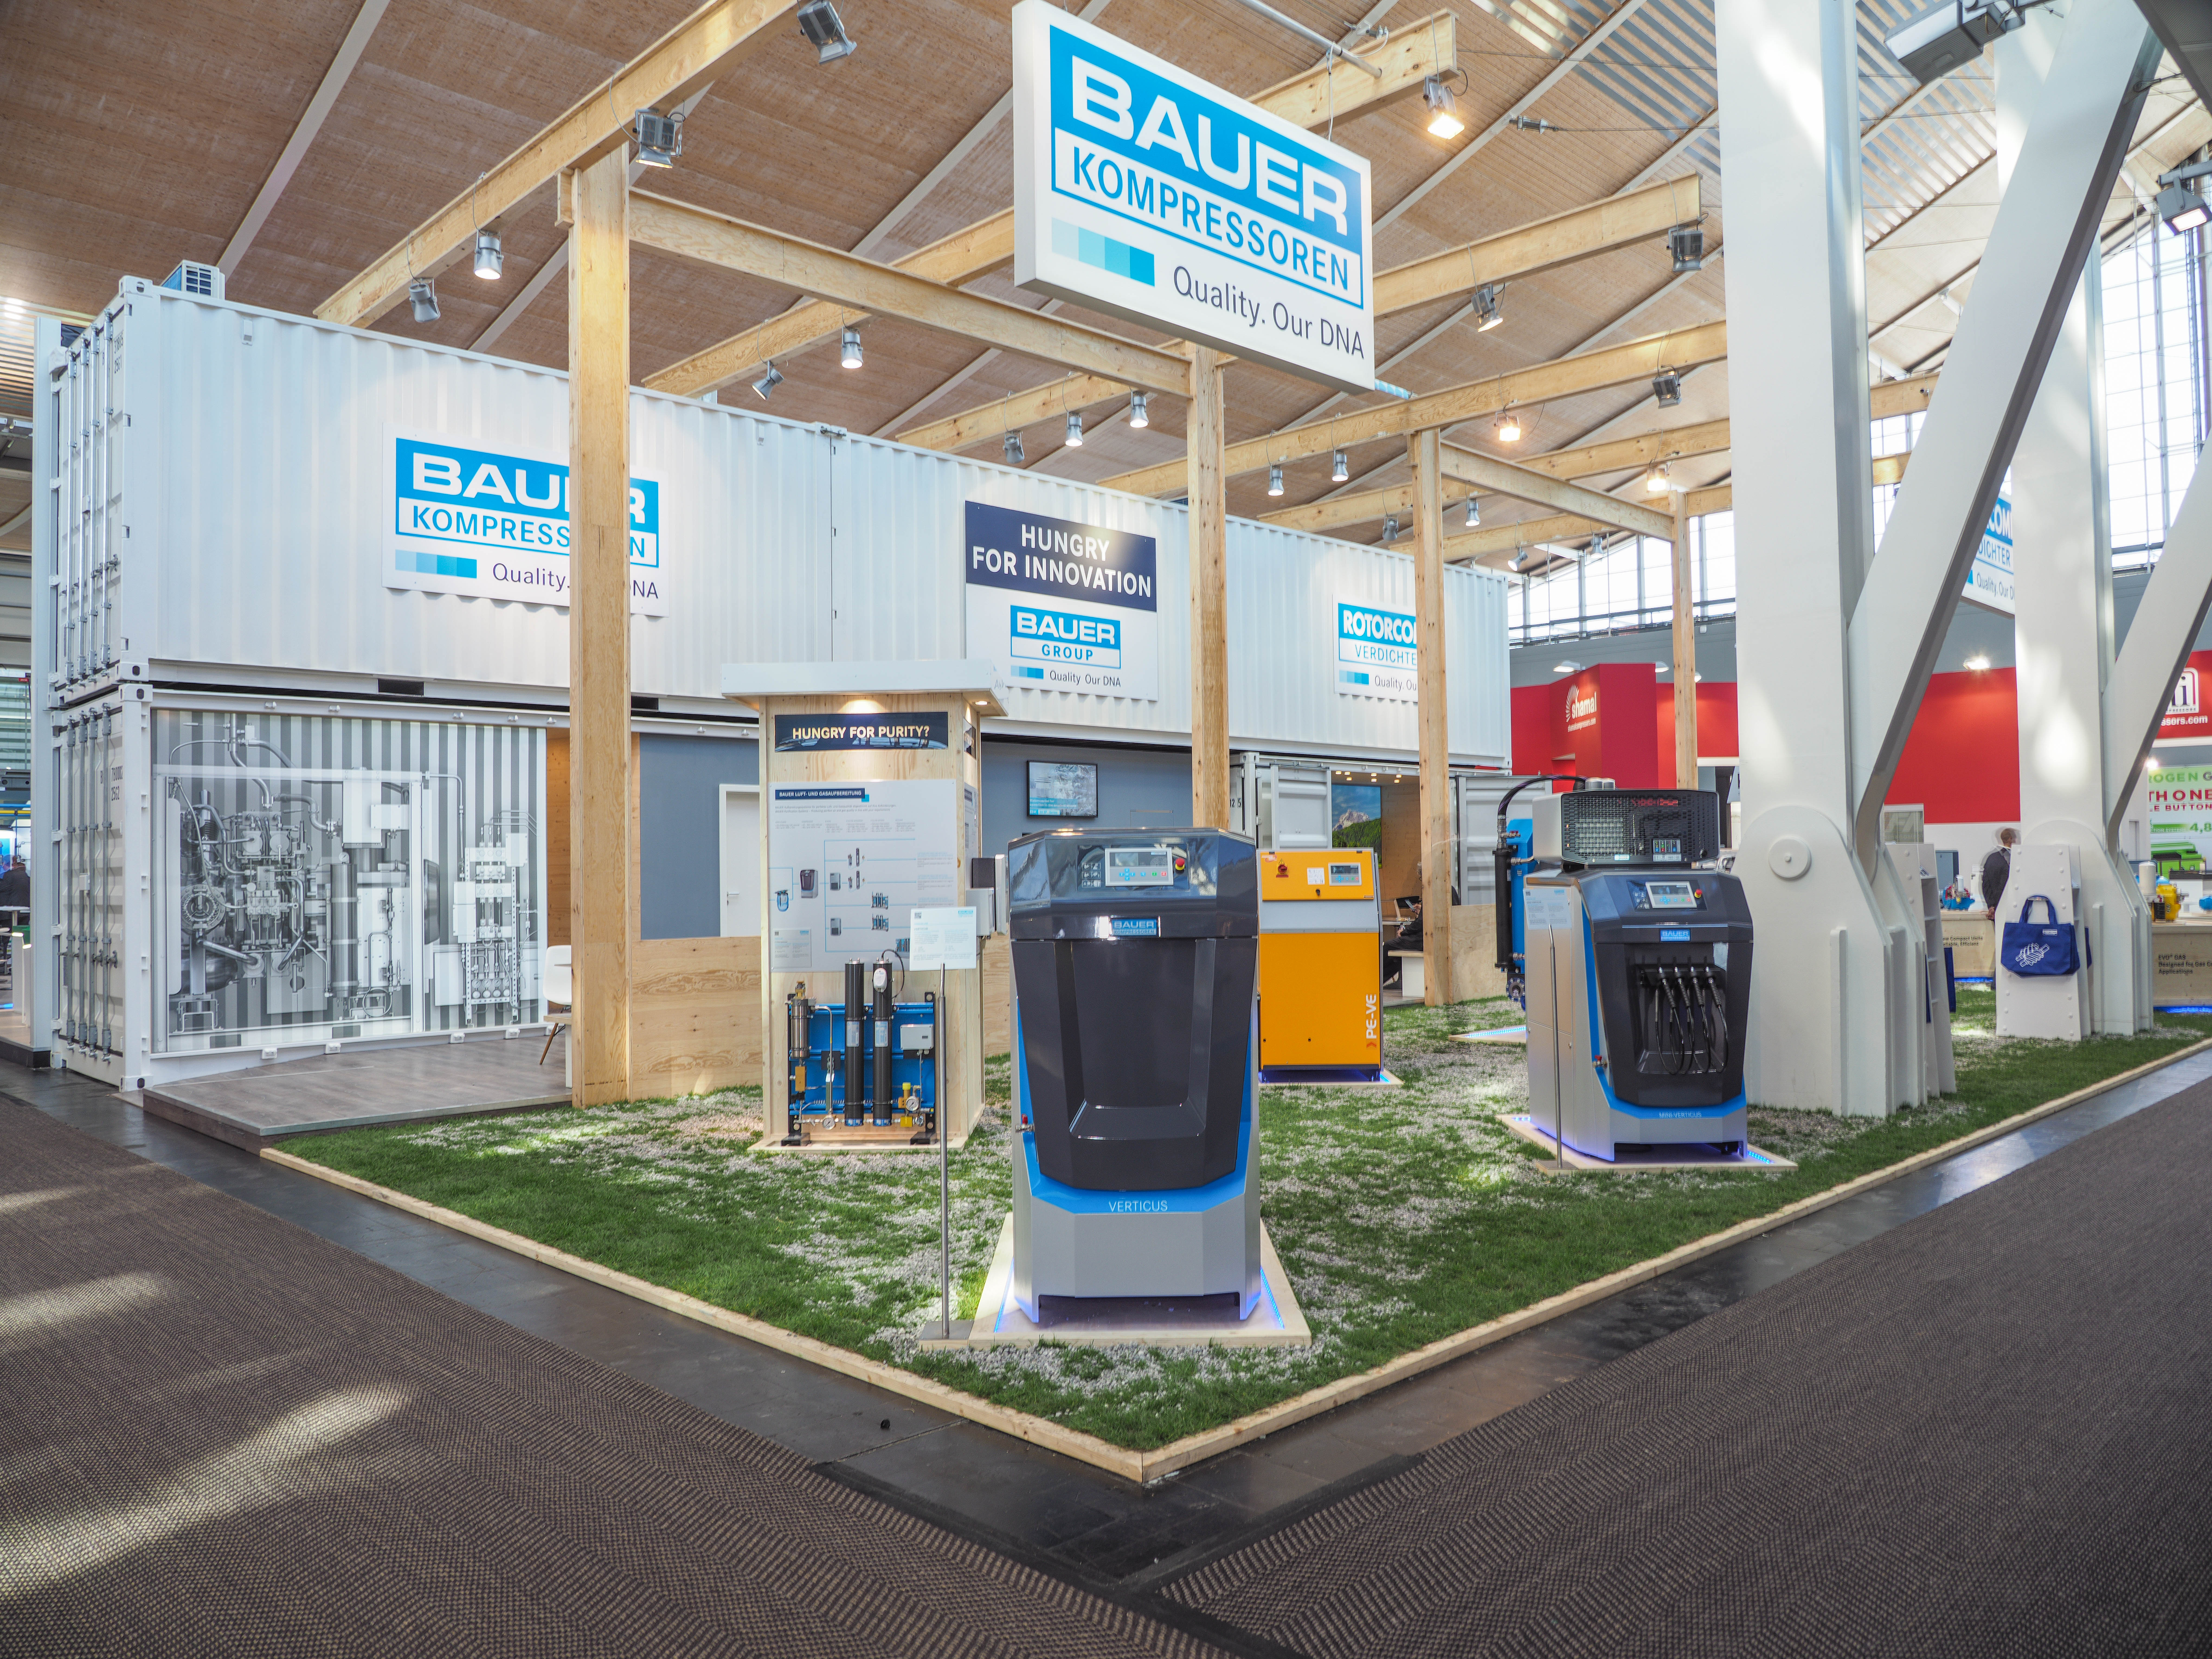   The bauer exhibion stand - Focus on sustainability 